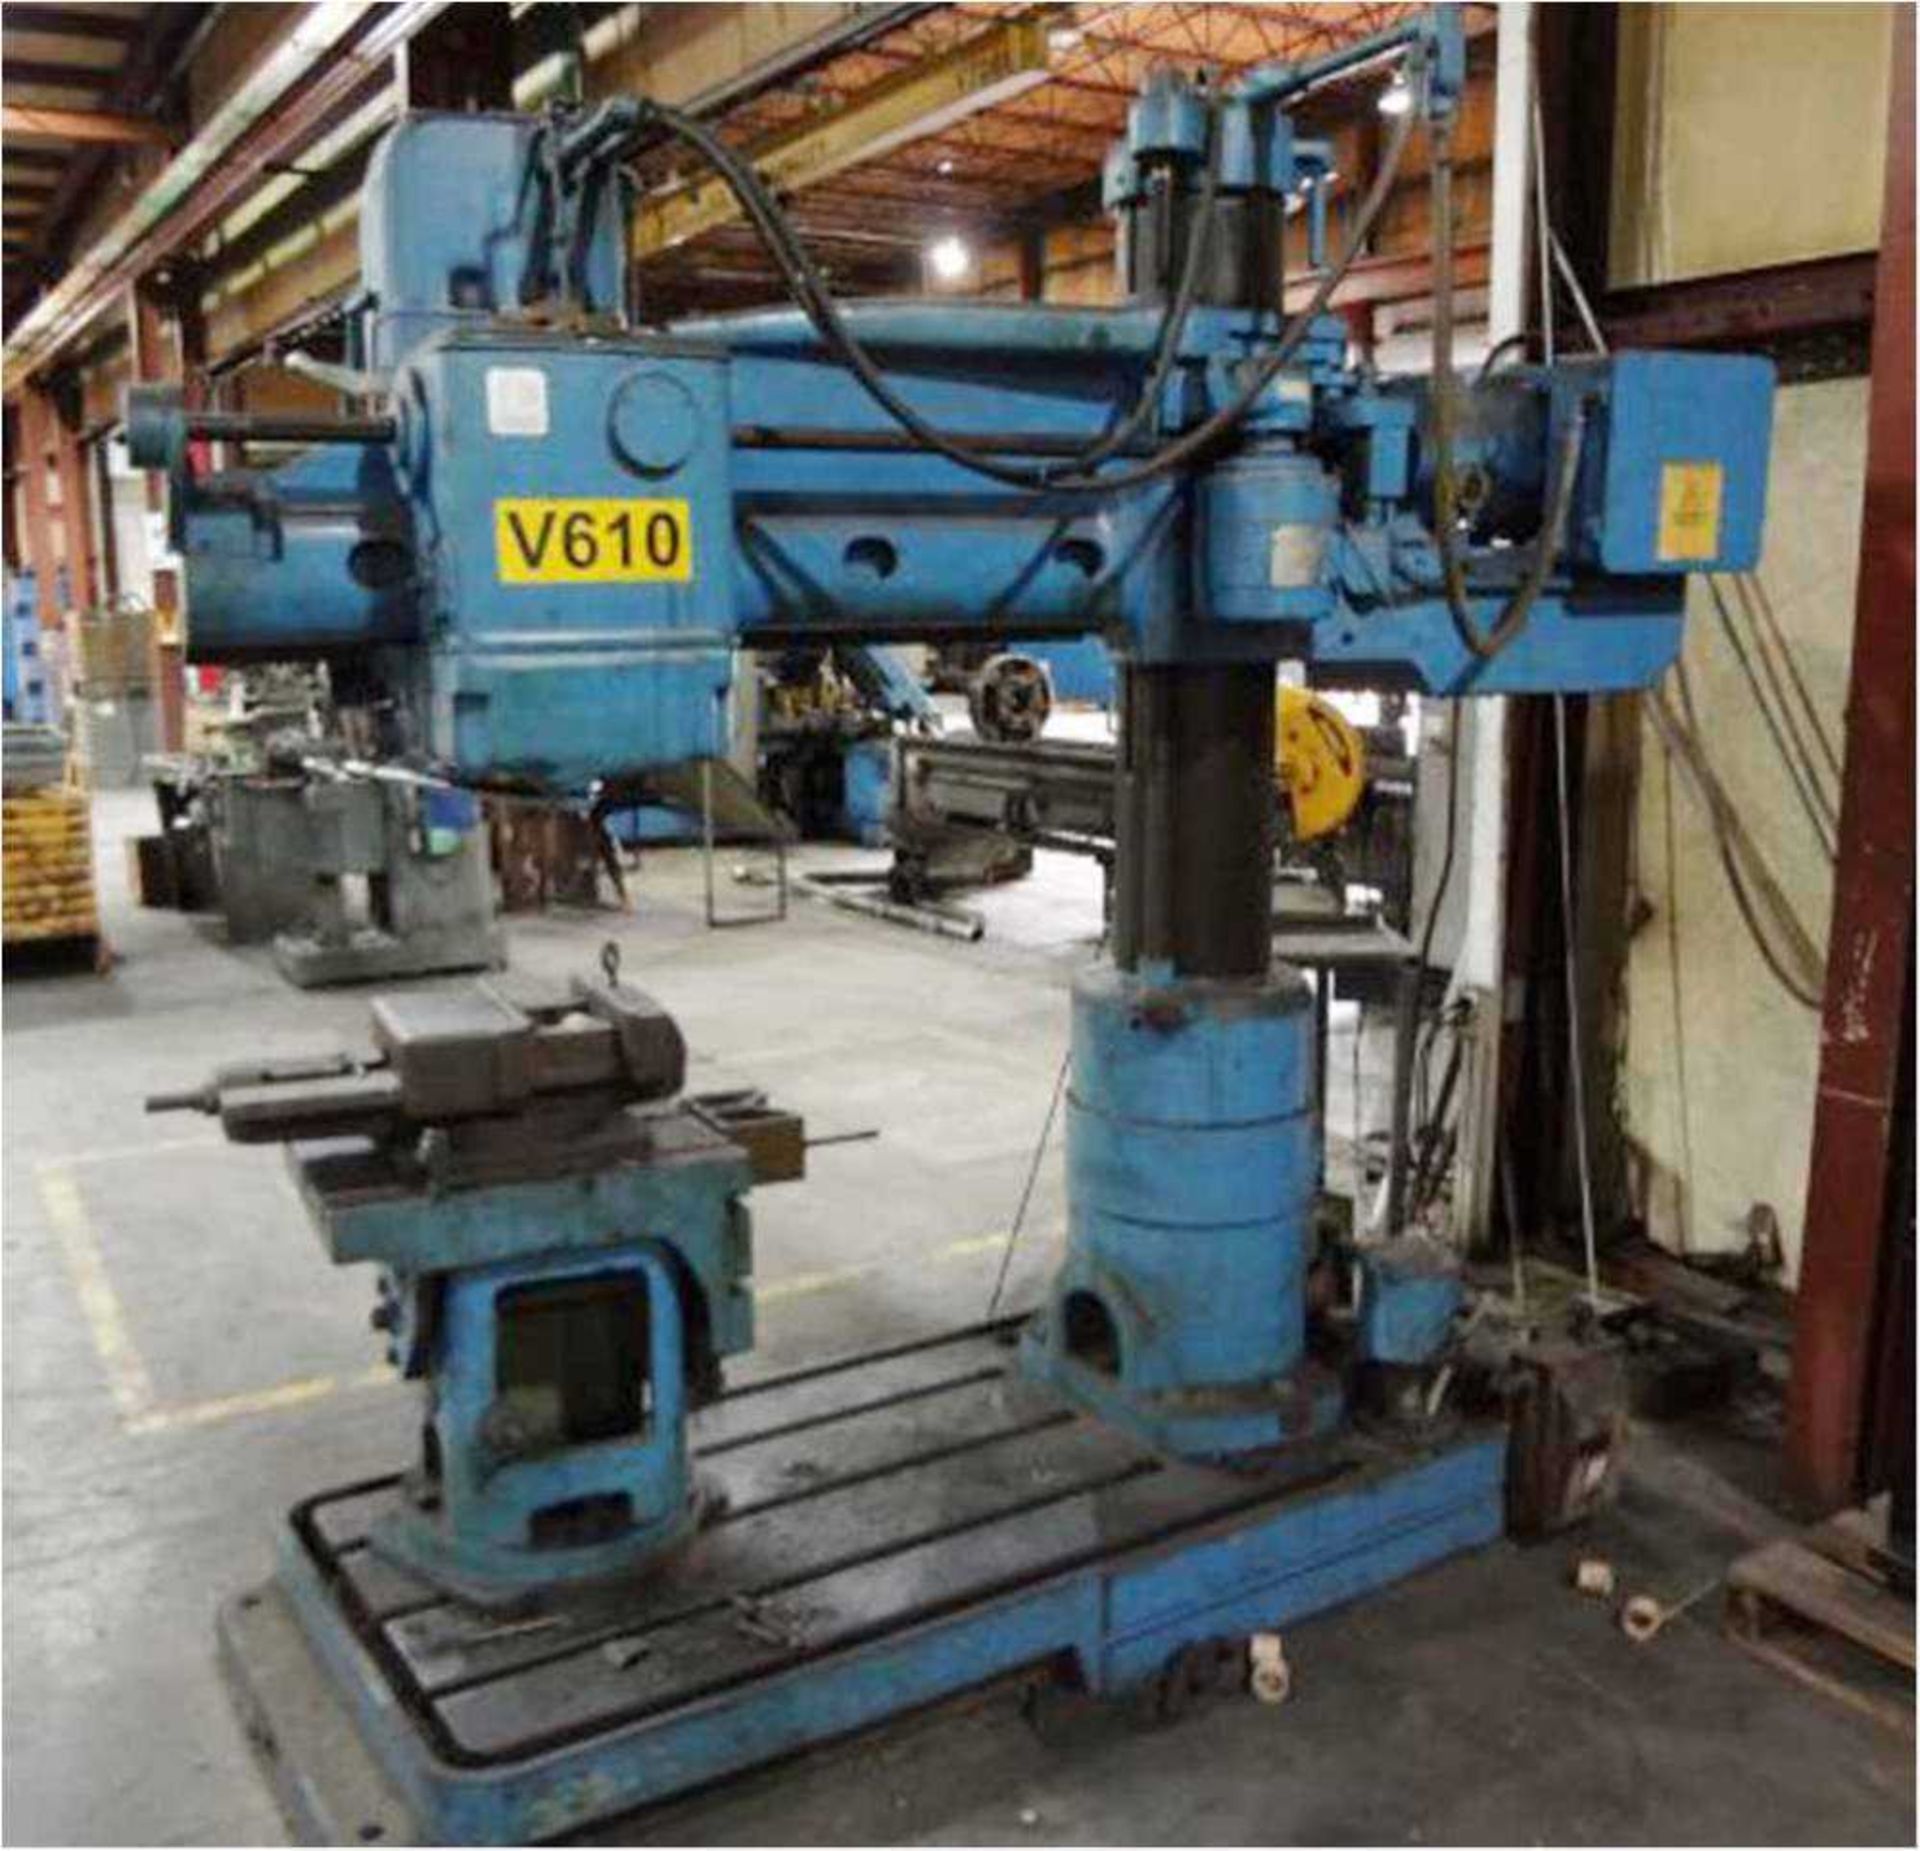 Carlton Radial Arm Drill, 4' x 11", Mdl: 1A, S/N: 1A-3845 (6663P) (Located In Painesville, OH) - Image 2 of 5